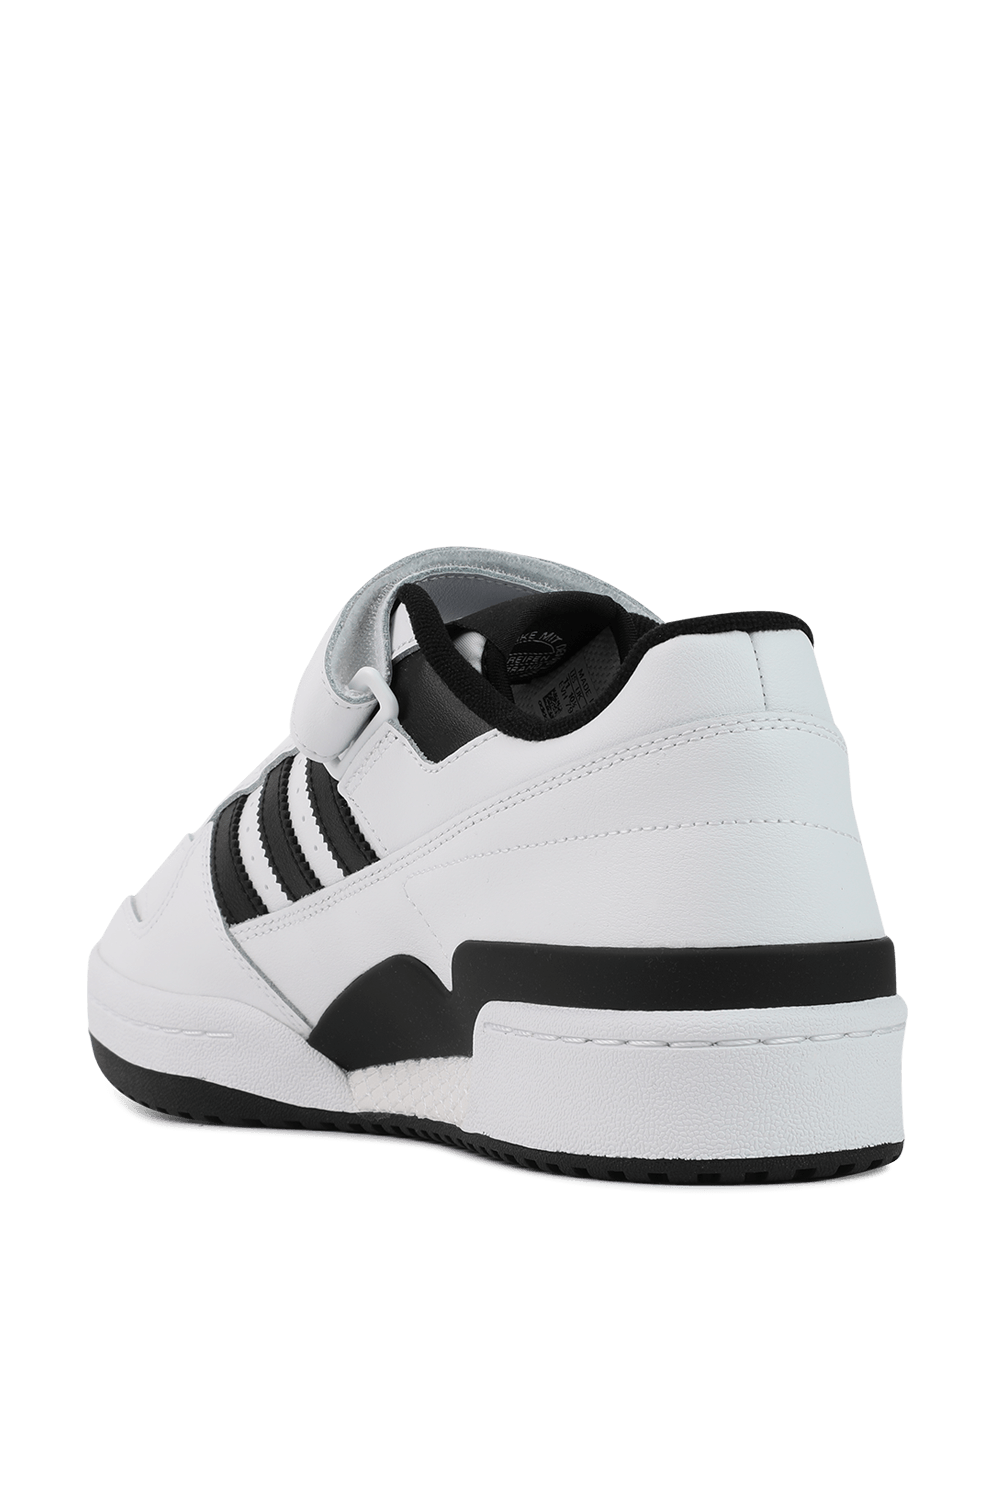 Forum Low Sneakers In White And Black ADIDAS ORIGINALS